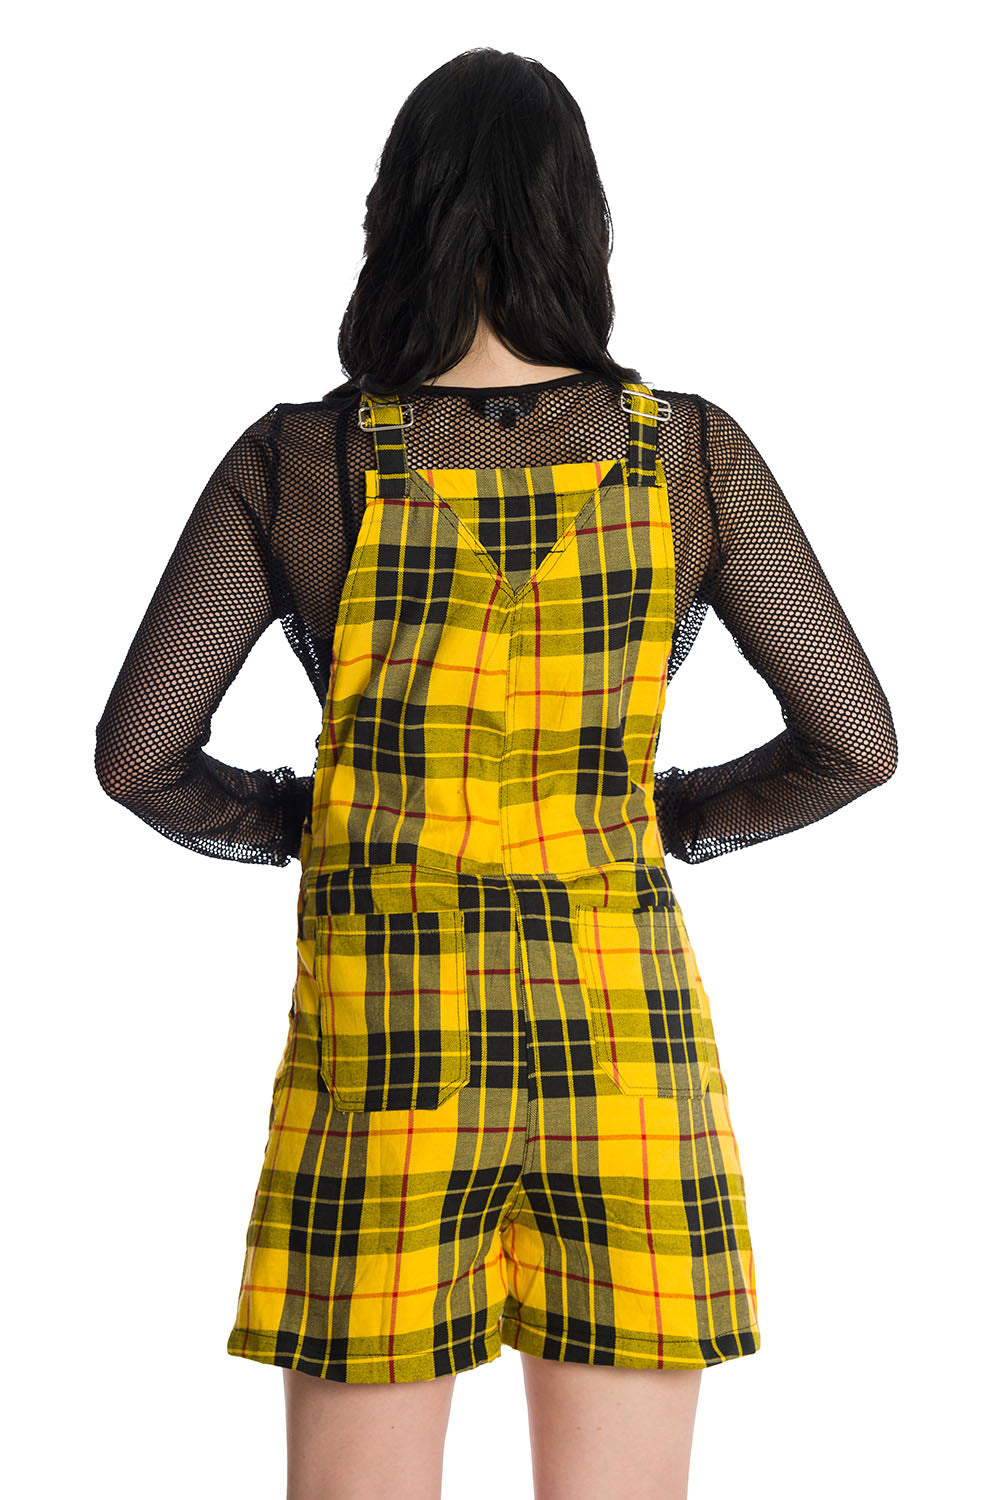 Banned Alternative Life's Too Short Dungarees